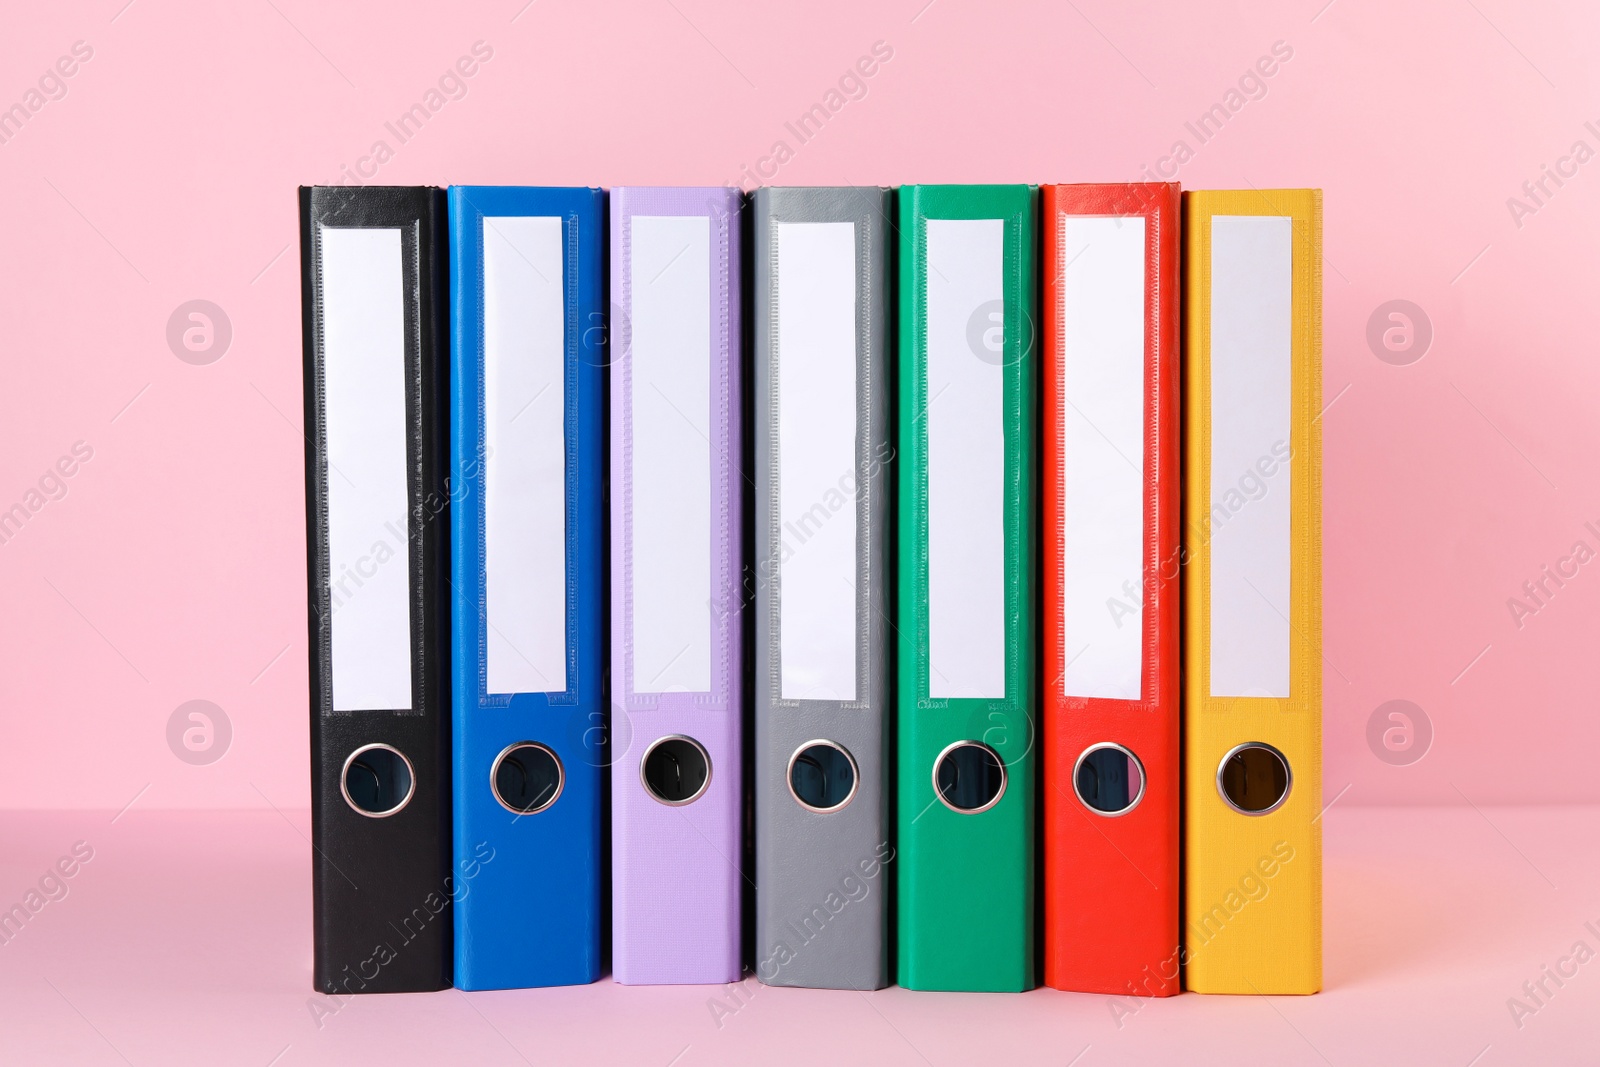 Photo of Many hardcover office folders on pink background